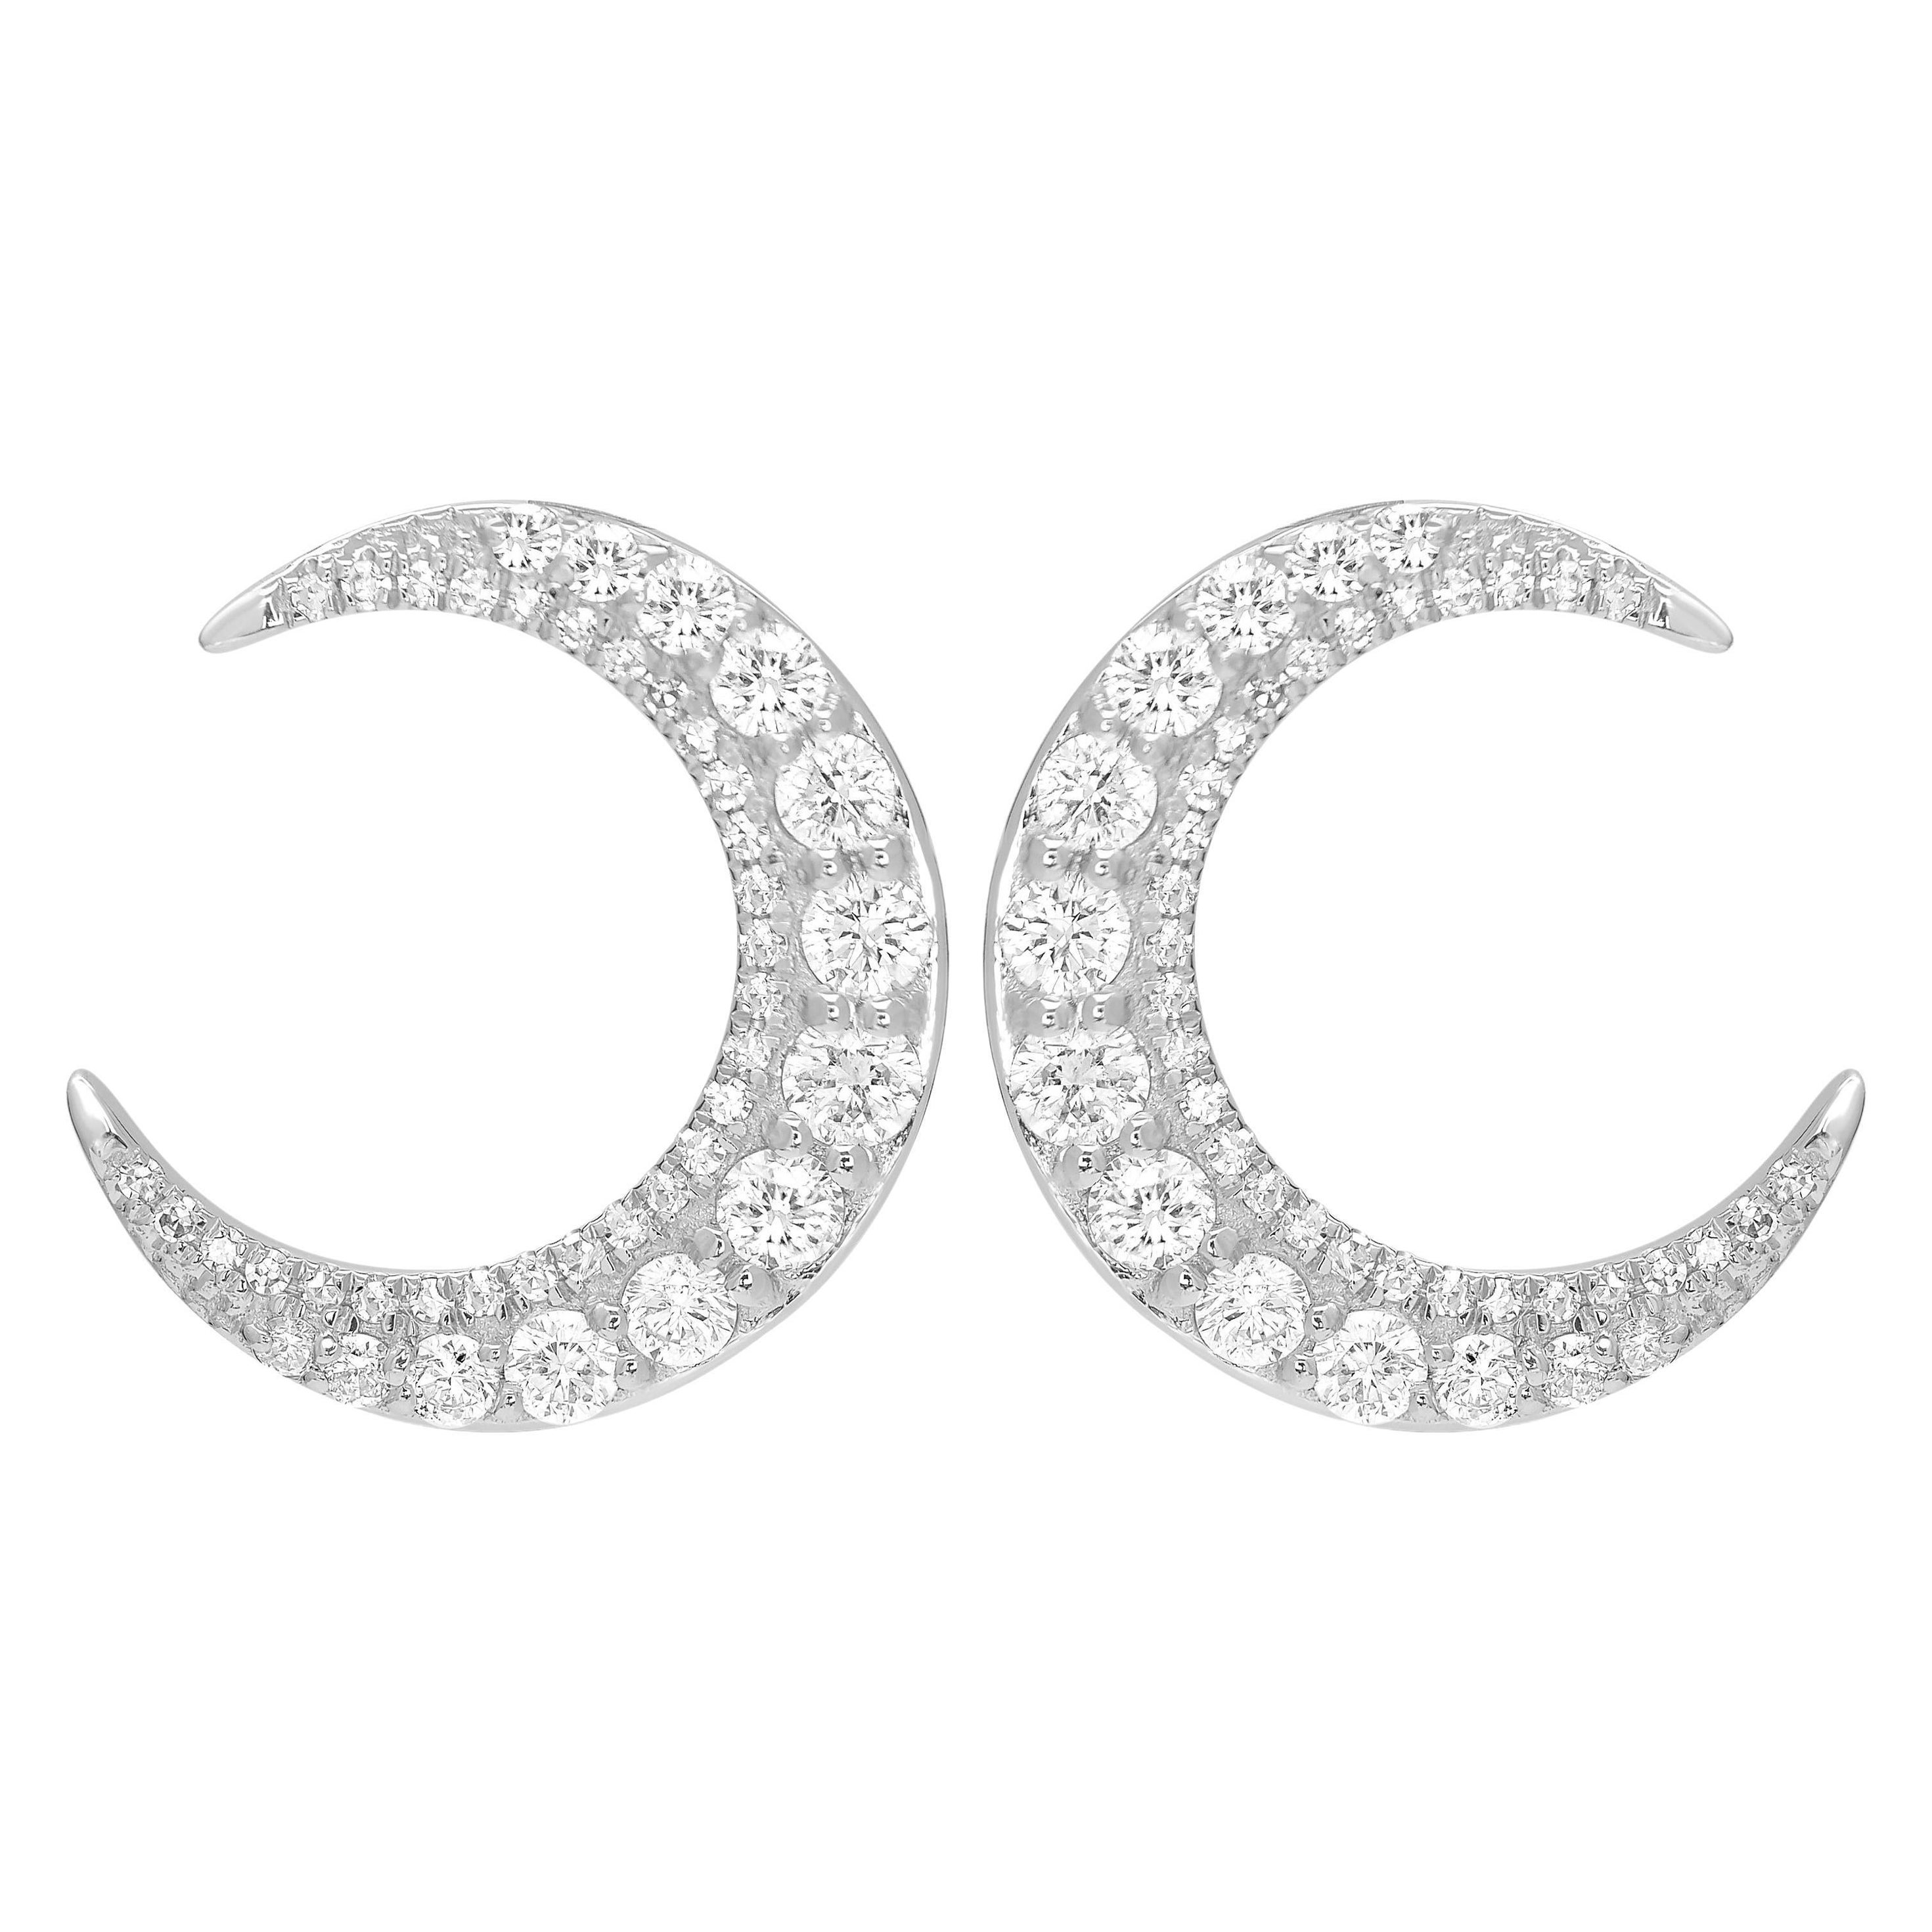 Luxle 0.88cttw. Round Diamond Crescent Moon Stud Earrings in 14k White Gold For Sale